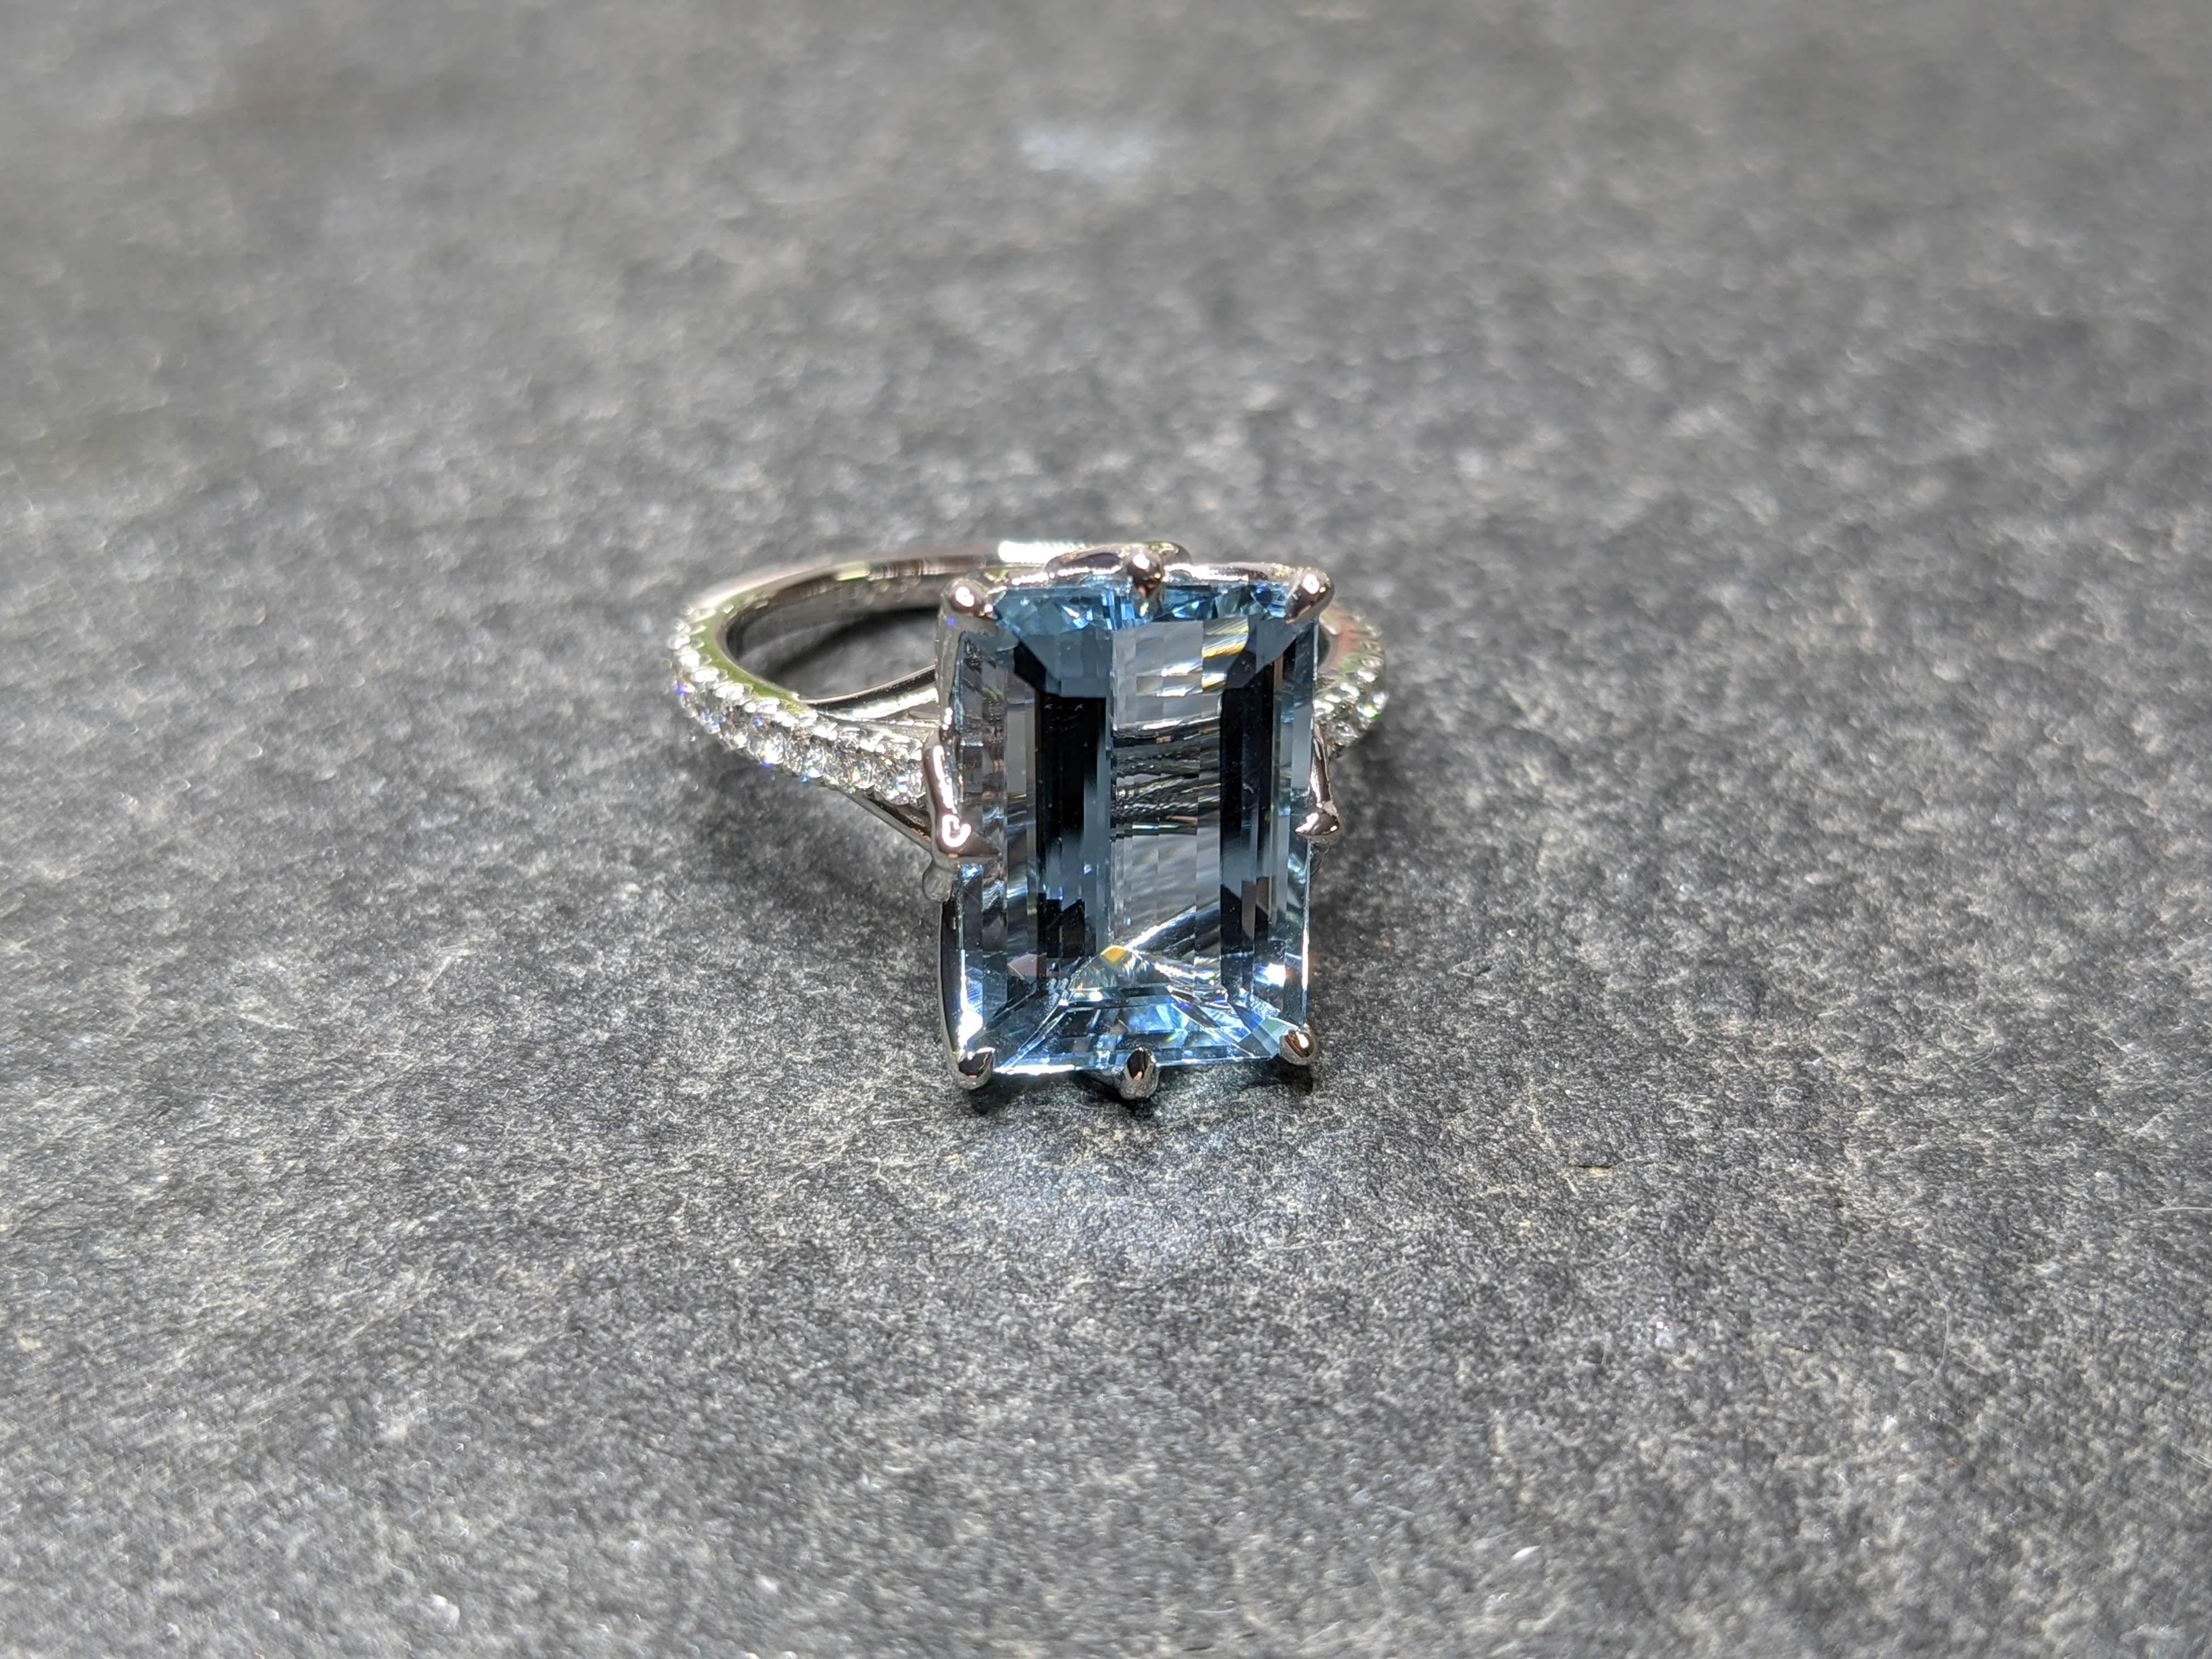 5.61 carat Aquamarine, emerald cut, very high quality color, eye clean gem, with a pave' of bright white diamonds F/G color, of approximately  total carat weight of 0.35 carat, set in a Platinum 950 floral-lotus motive,  manufactured with the best